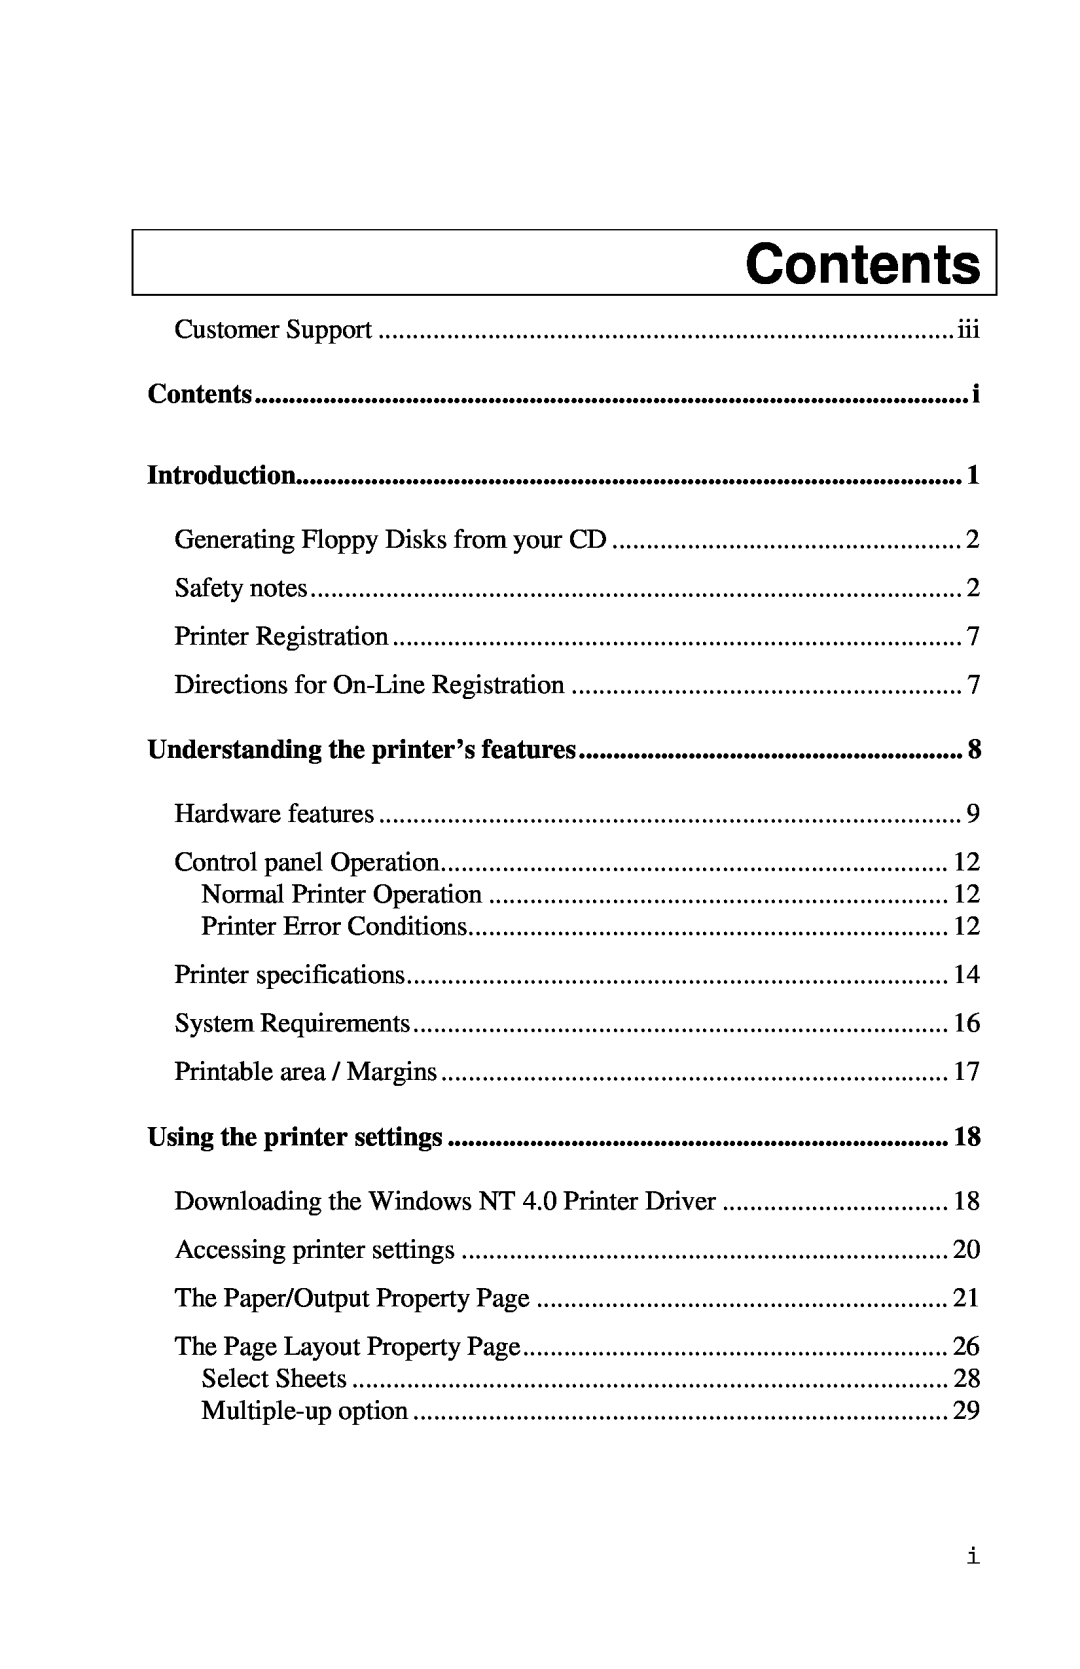 Xerox Inkjet Printer manual Contents, Introduction, Understanding the printer’s features, Using the printer settings 